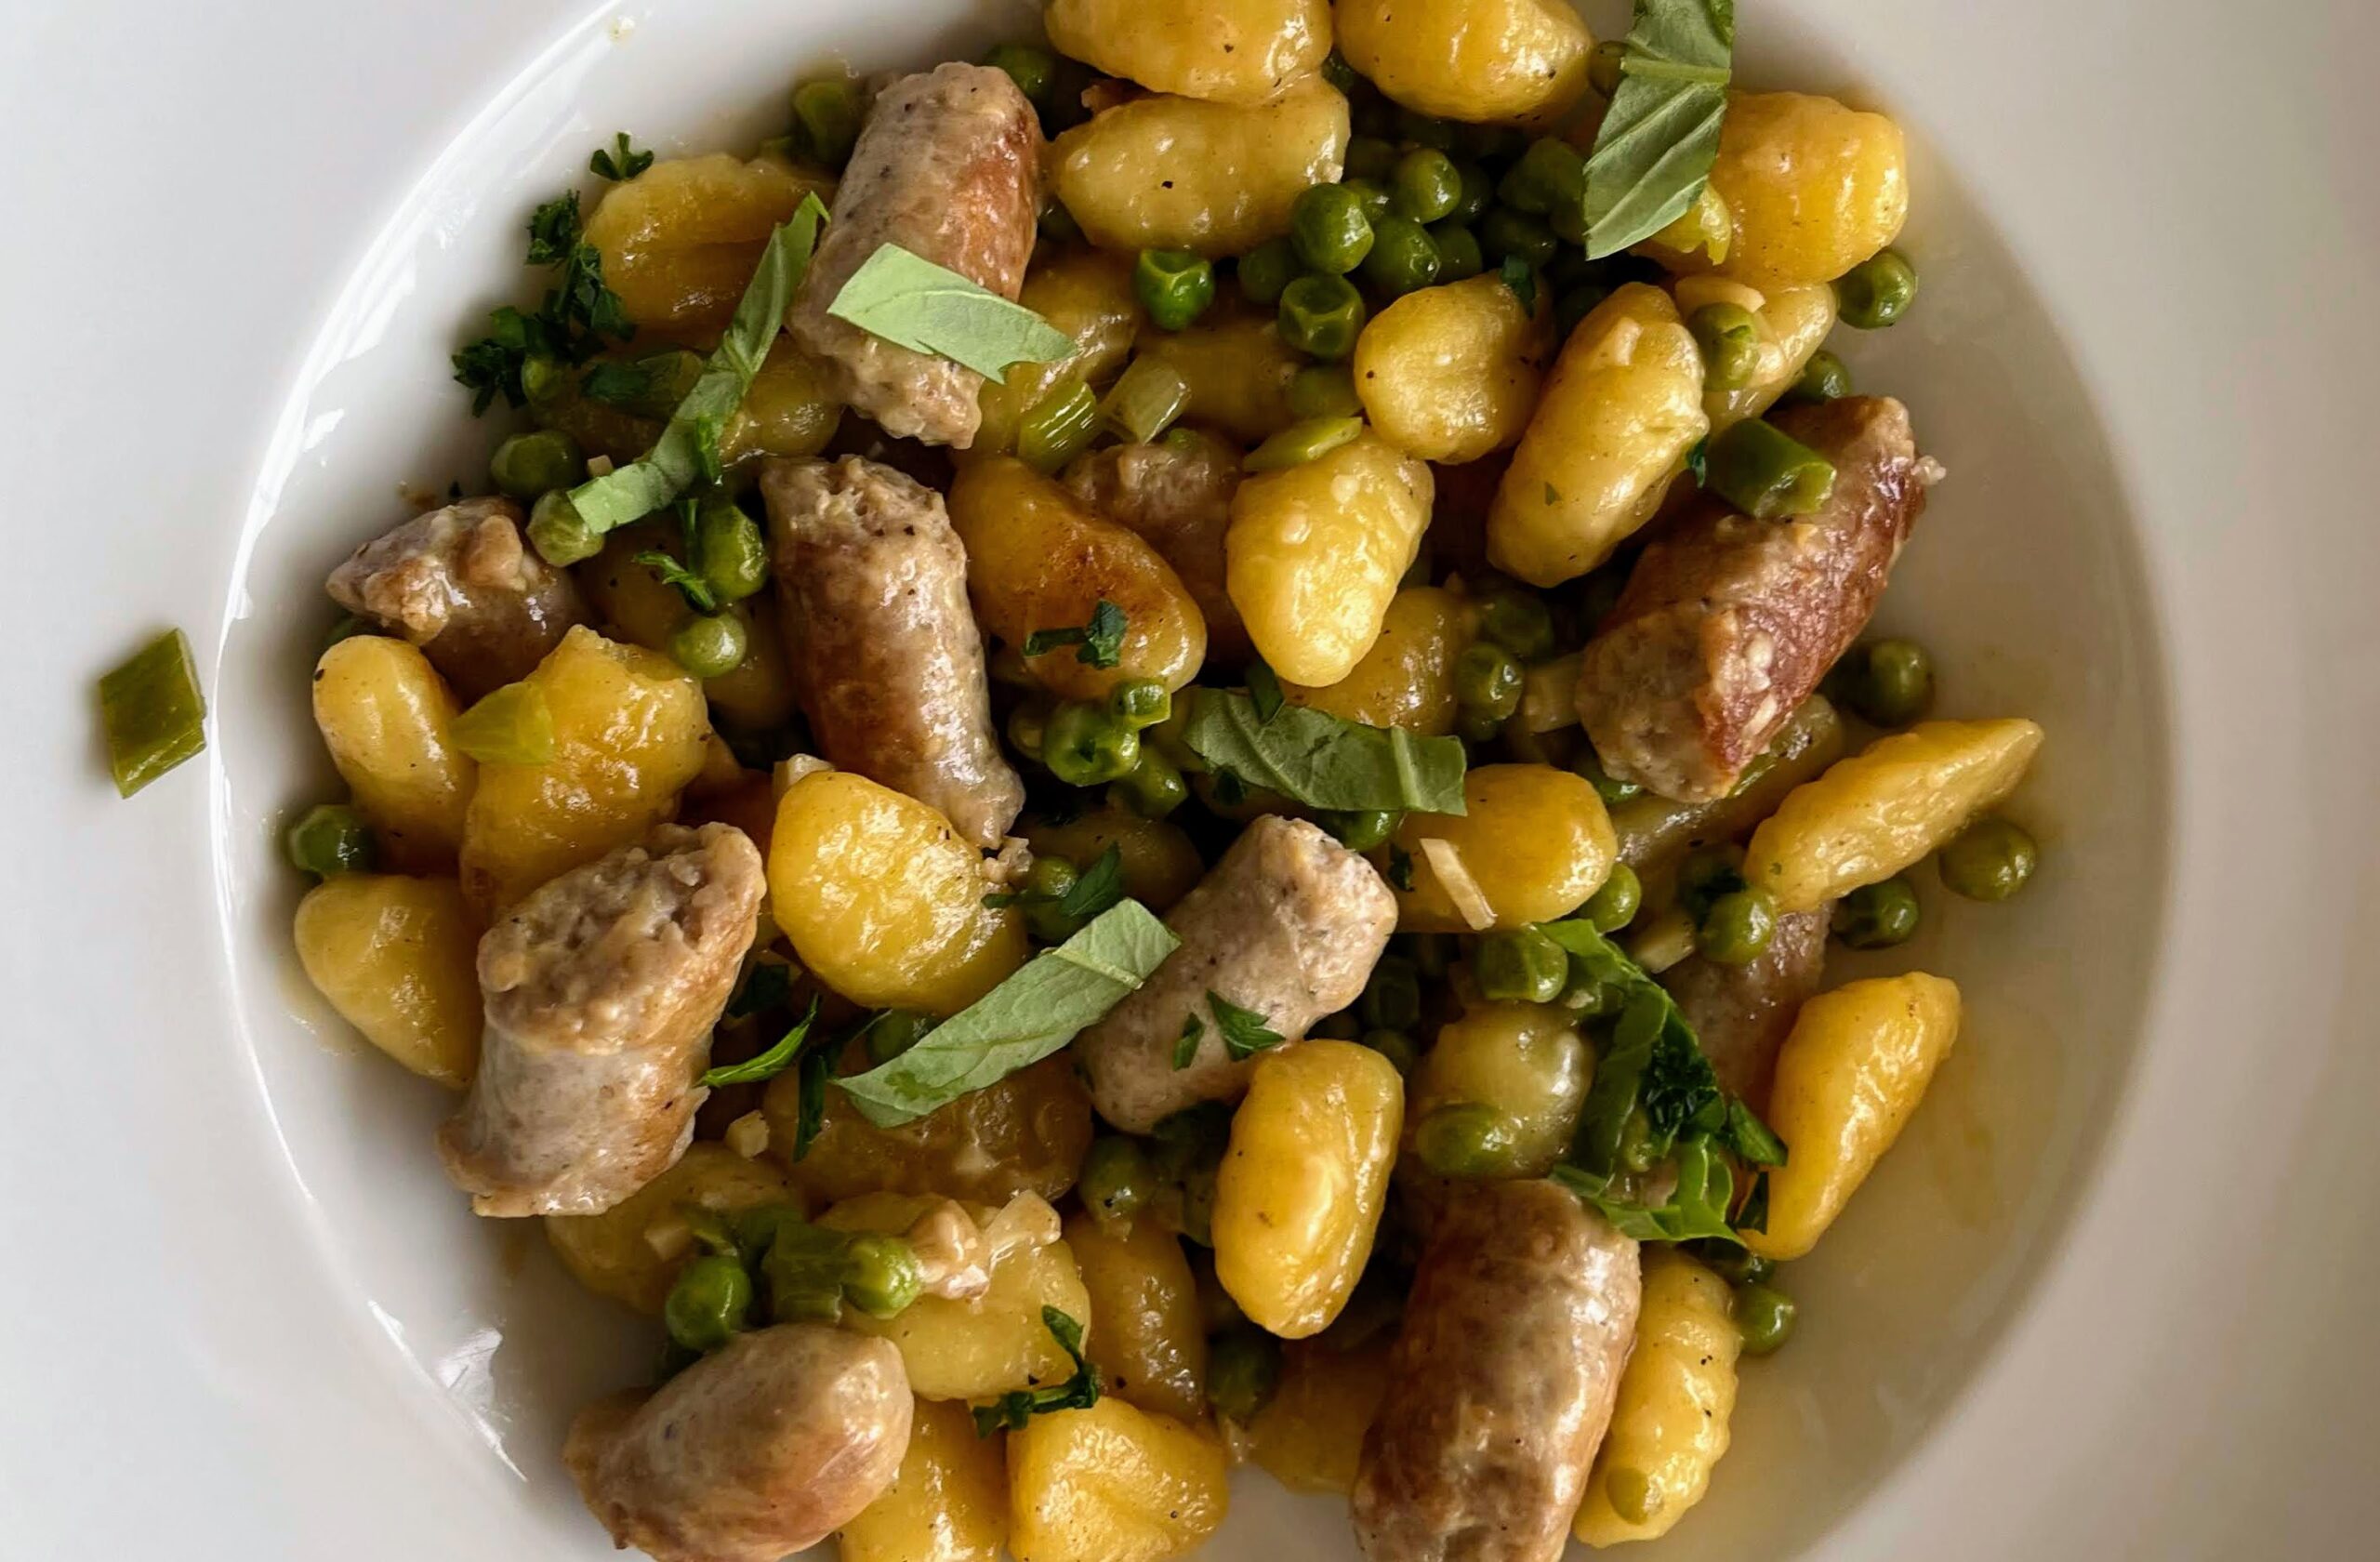 Gnocchi with Sausages and Peas